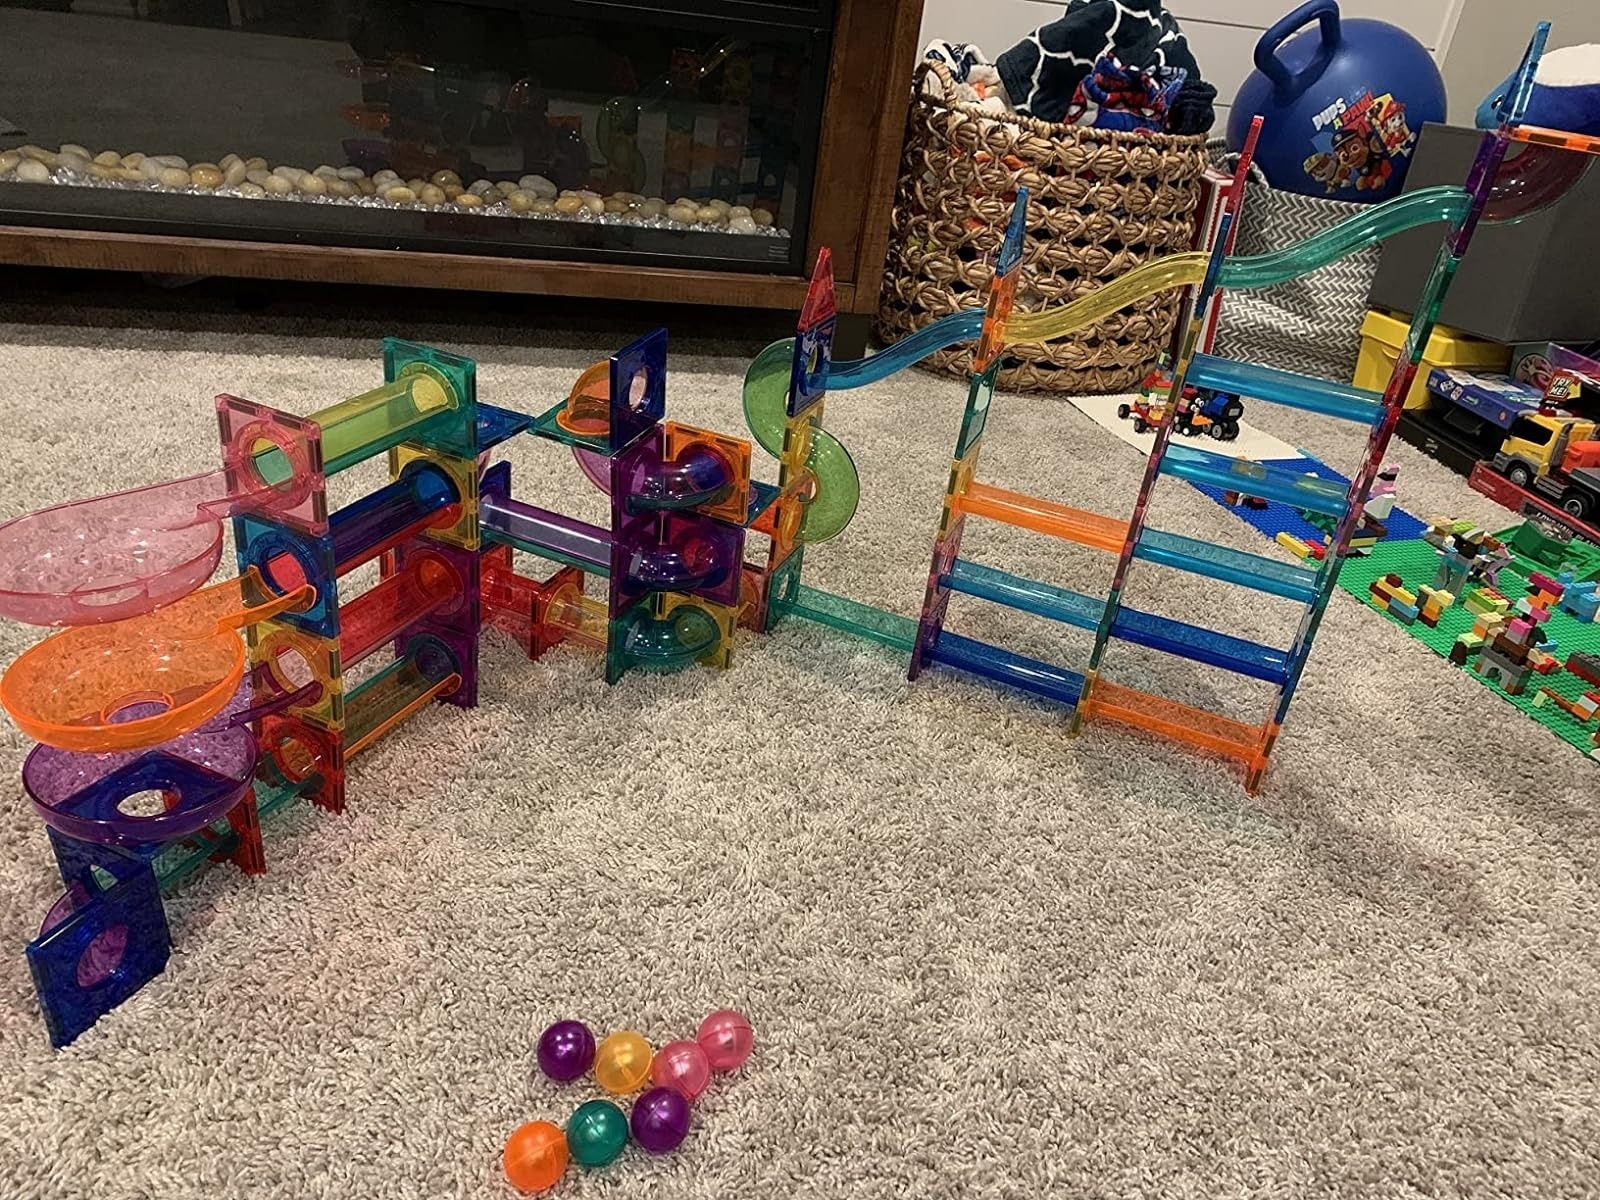 Colorful marble run set with tracks and structures set up on a carpeted floor. Various toys and a basket of toys are visible in the background